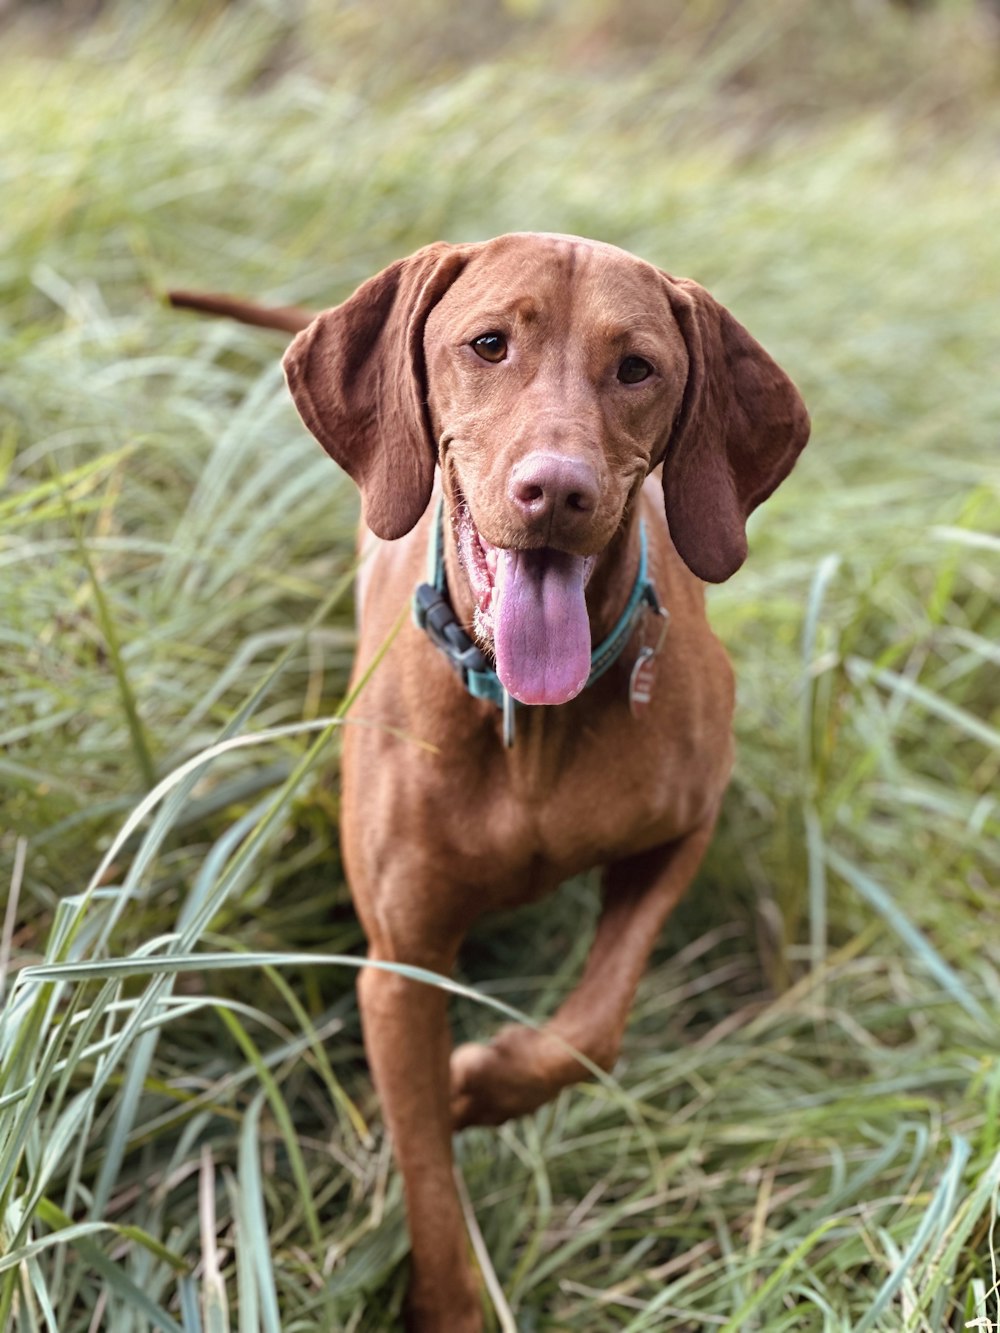 a brown dog sitting in the grass with its tongue out